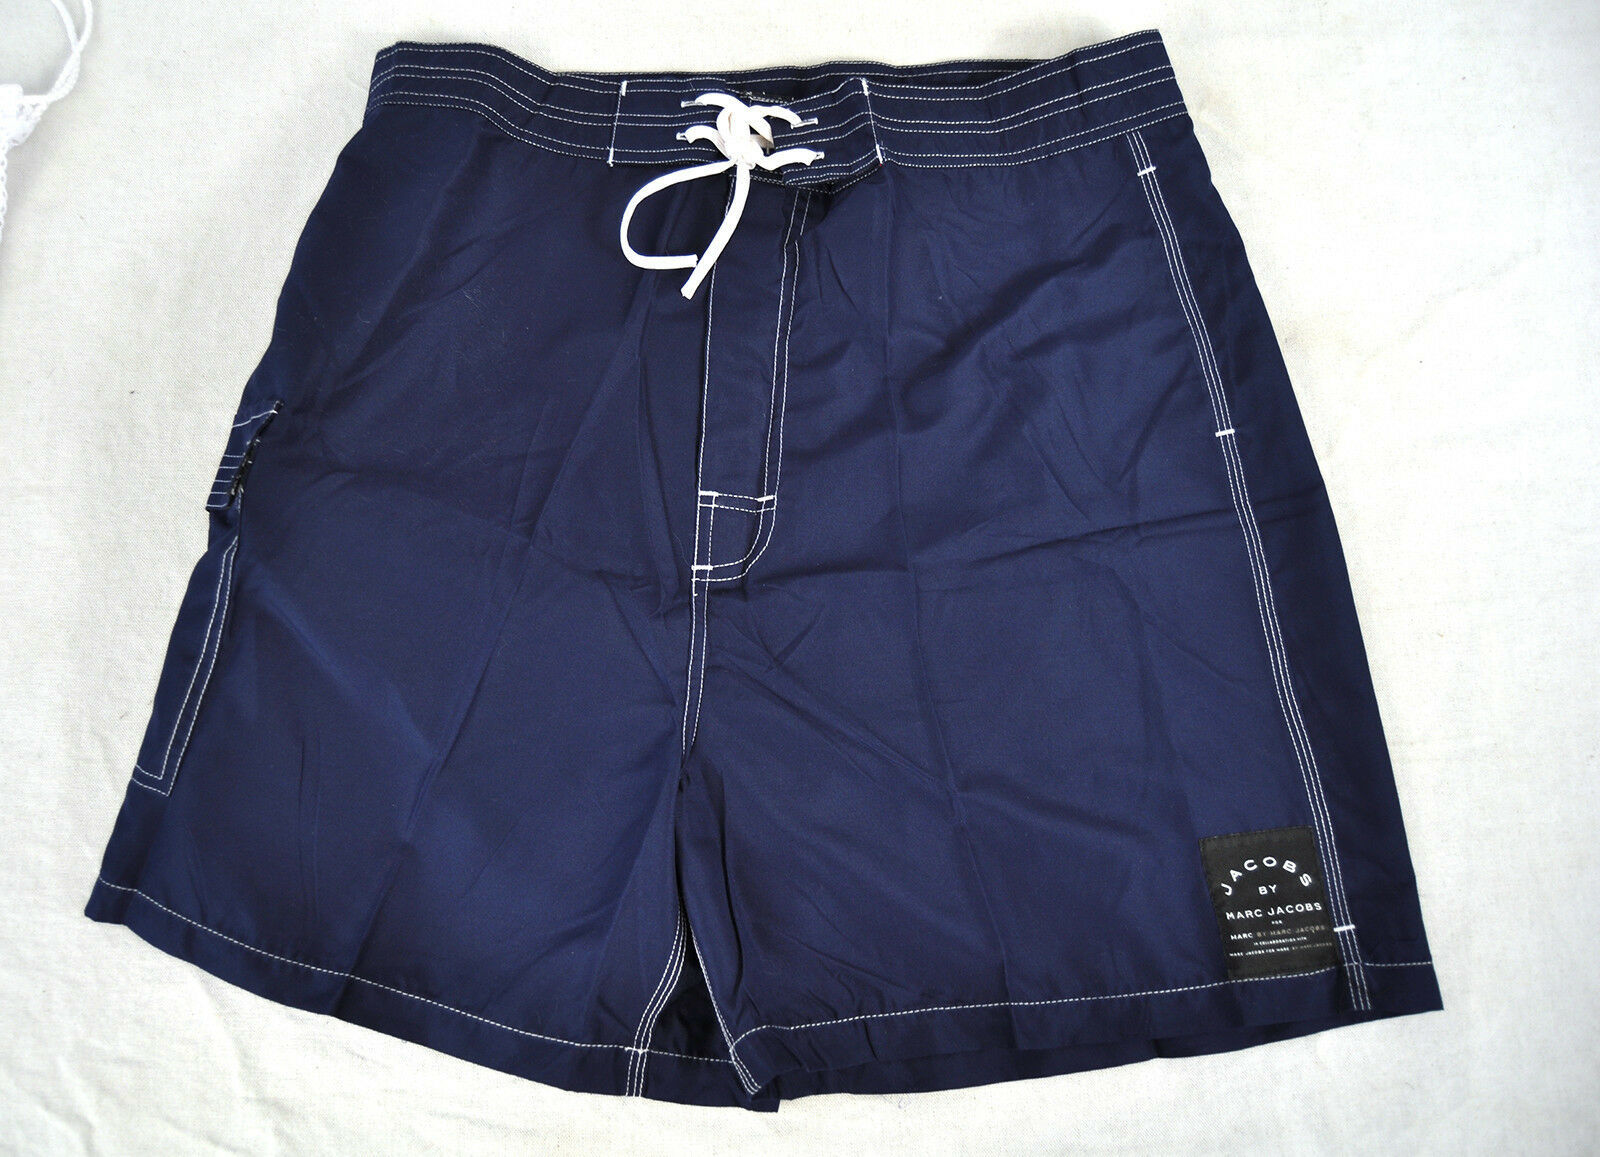 Marc by Marc Jacobs Blue Navy Swim Trunks Shorts 32 38 NWT with Dustbag - $39.60 - $44.55